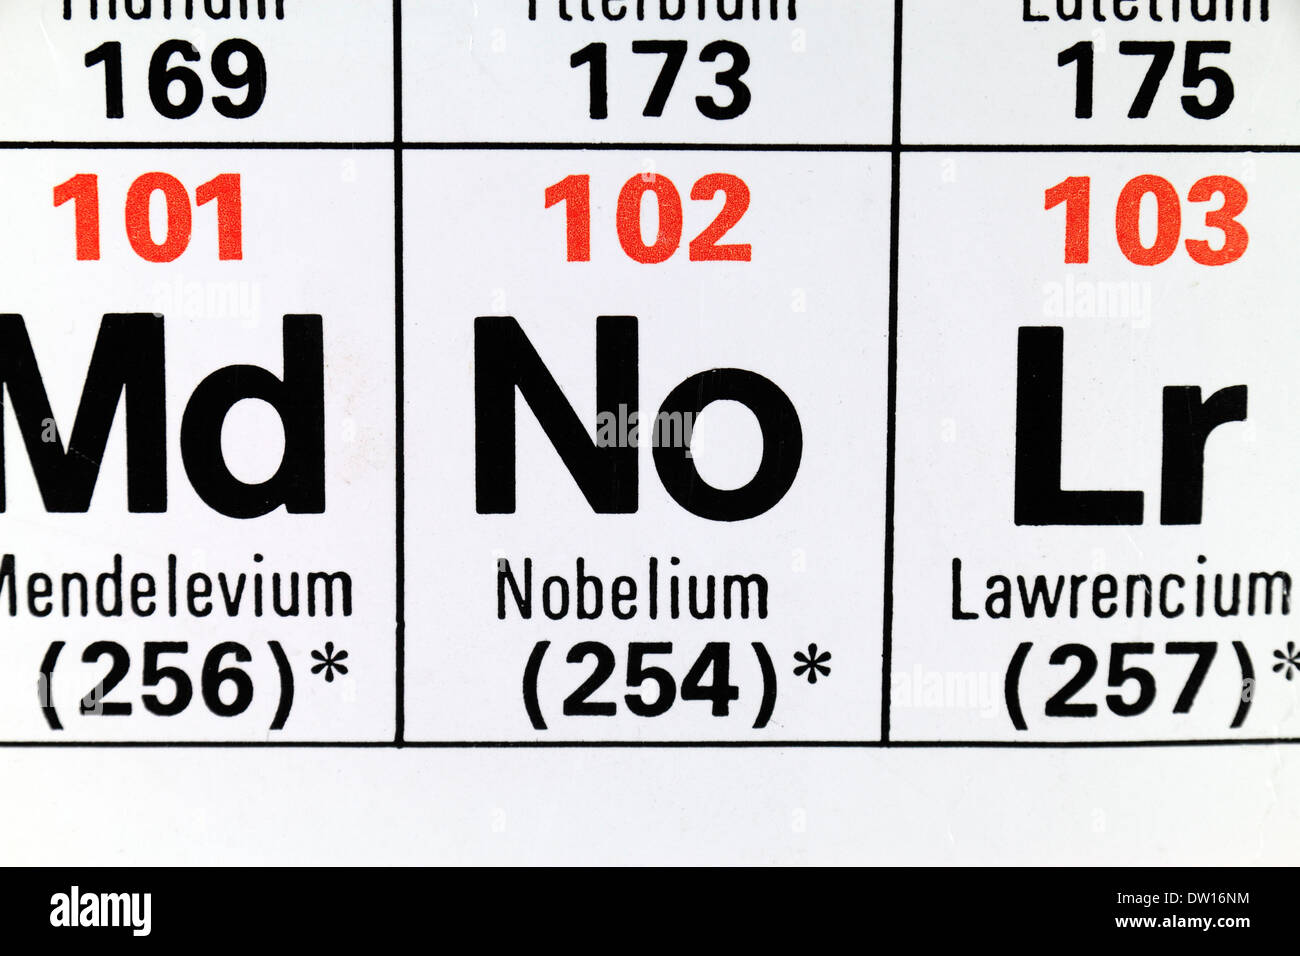 Nobelium No As It Appears On The Periodic Table Stock Photo Alamy